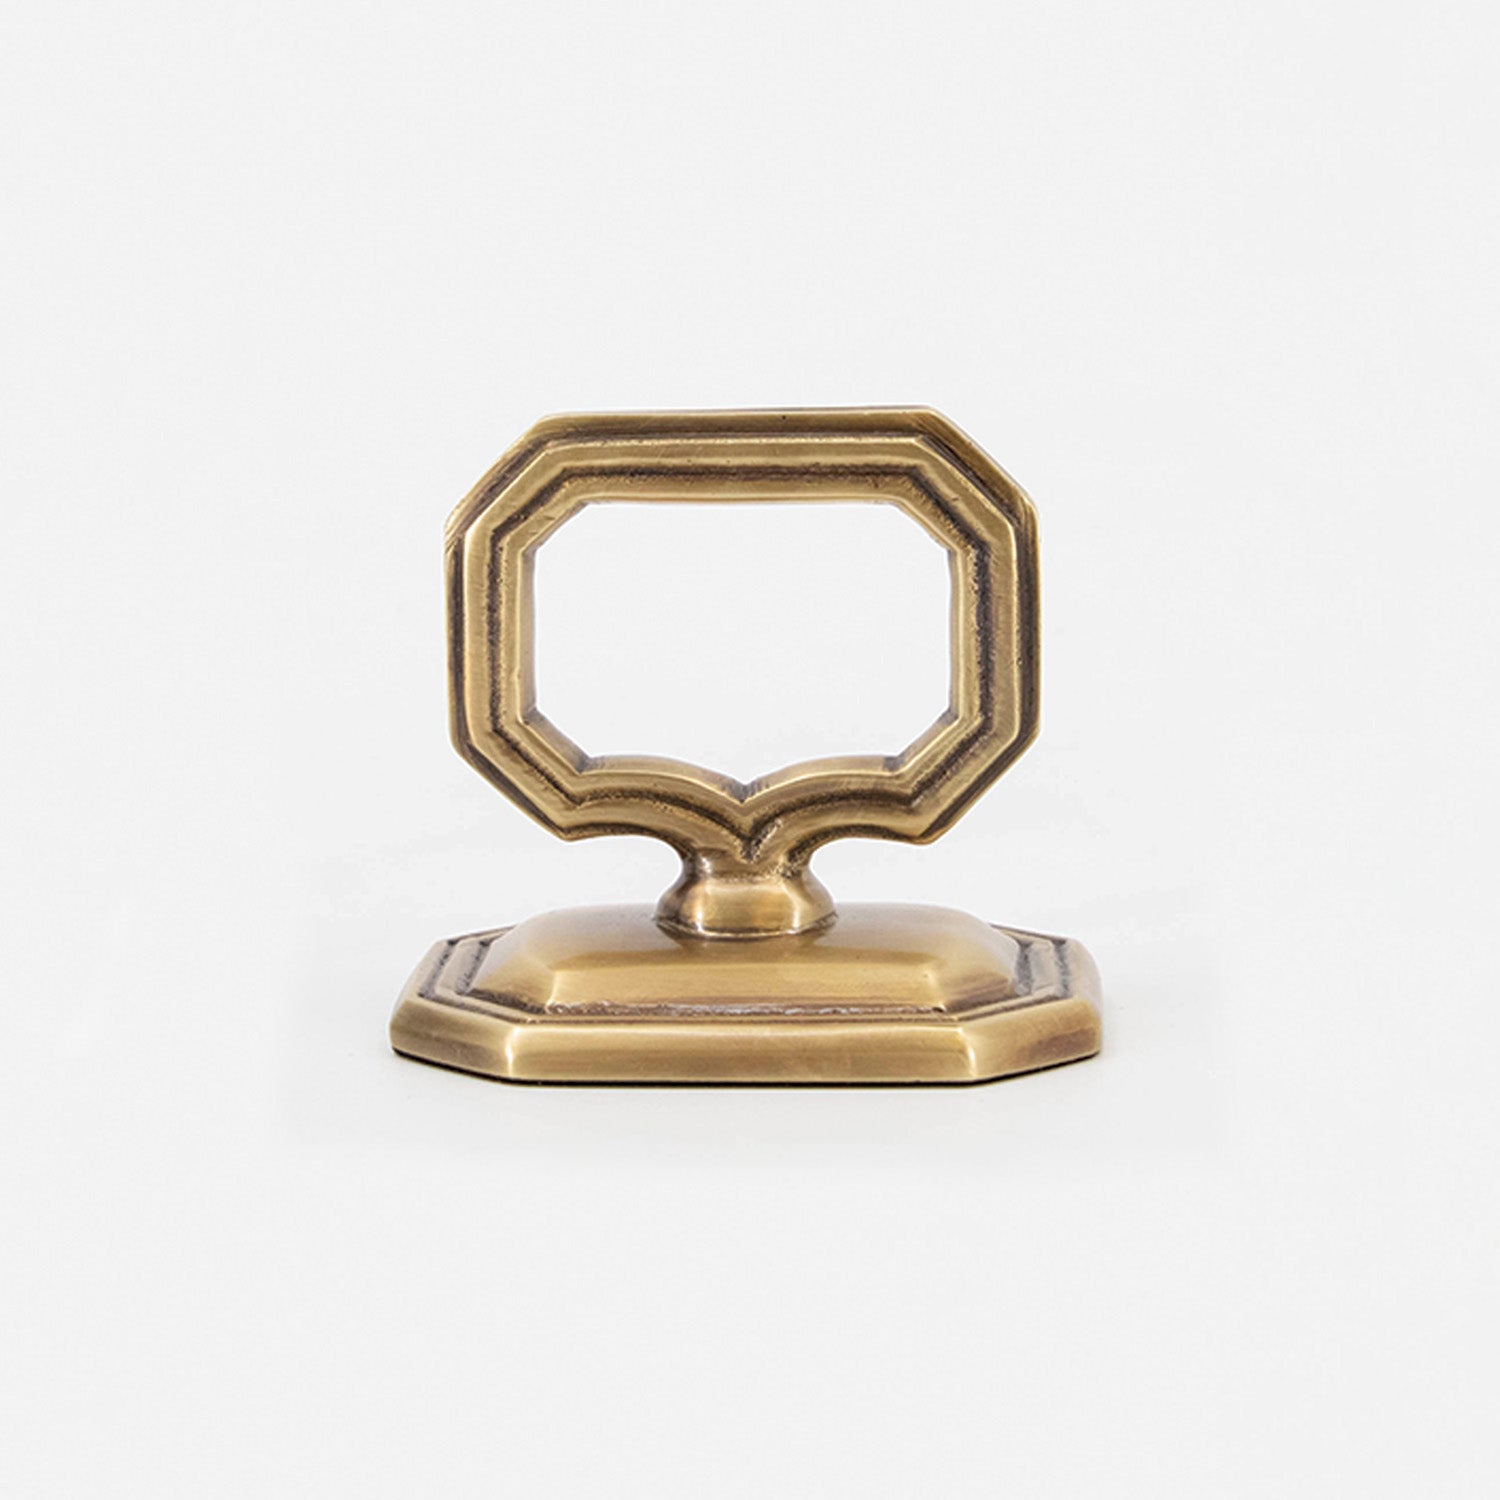 A brass vintage-style Napkin Ring with Place Card Holder on a white background.